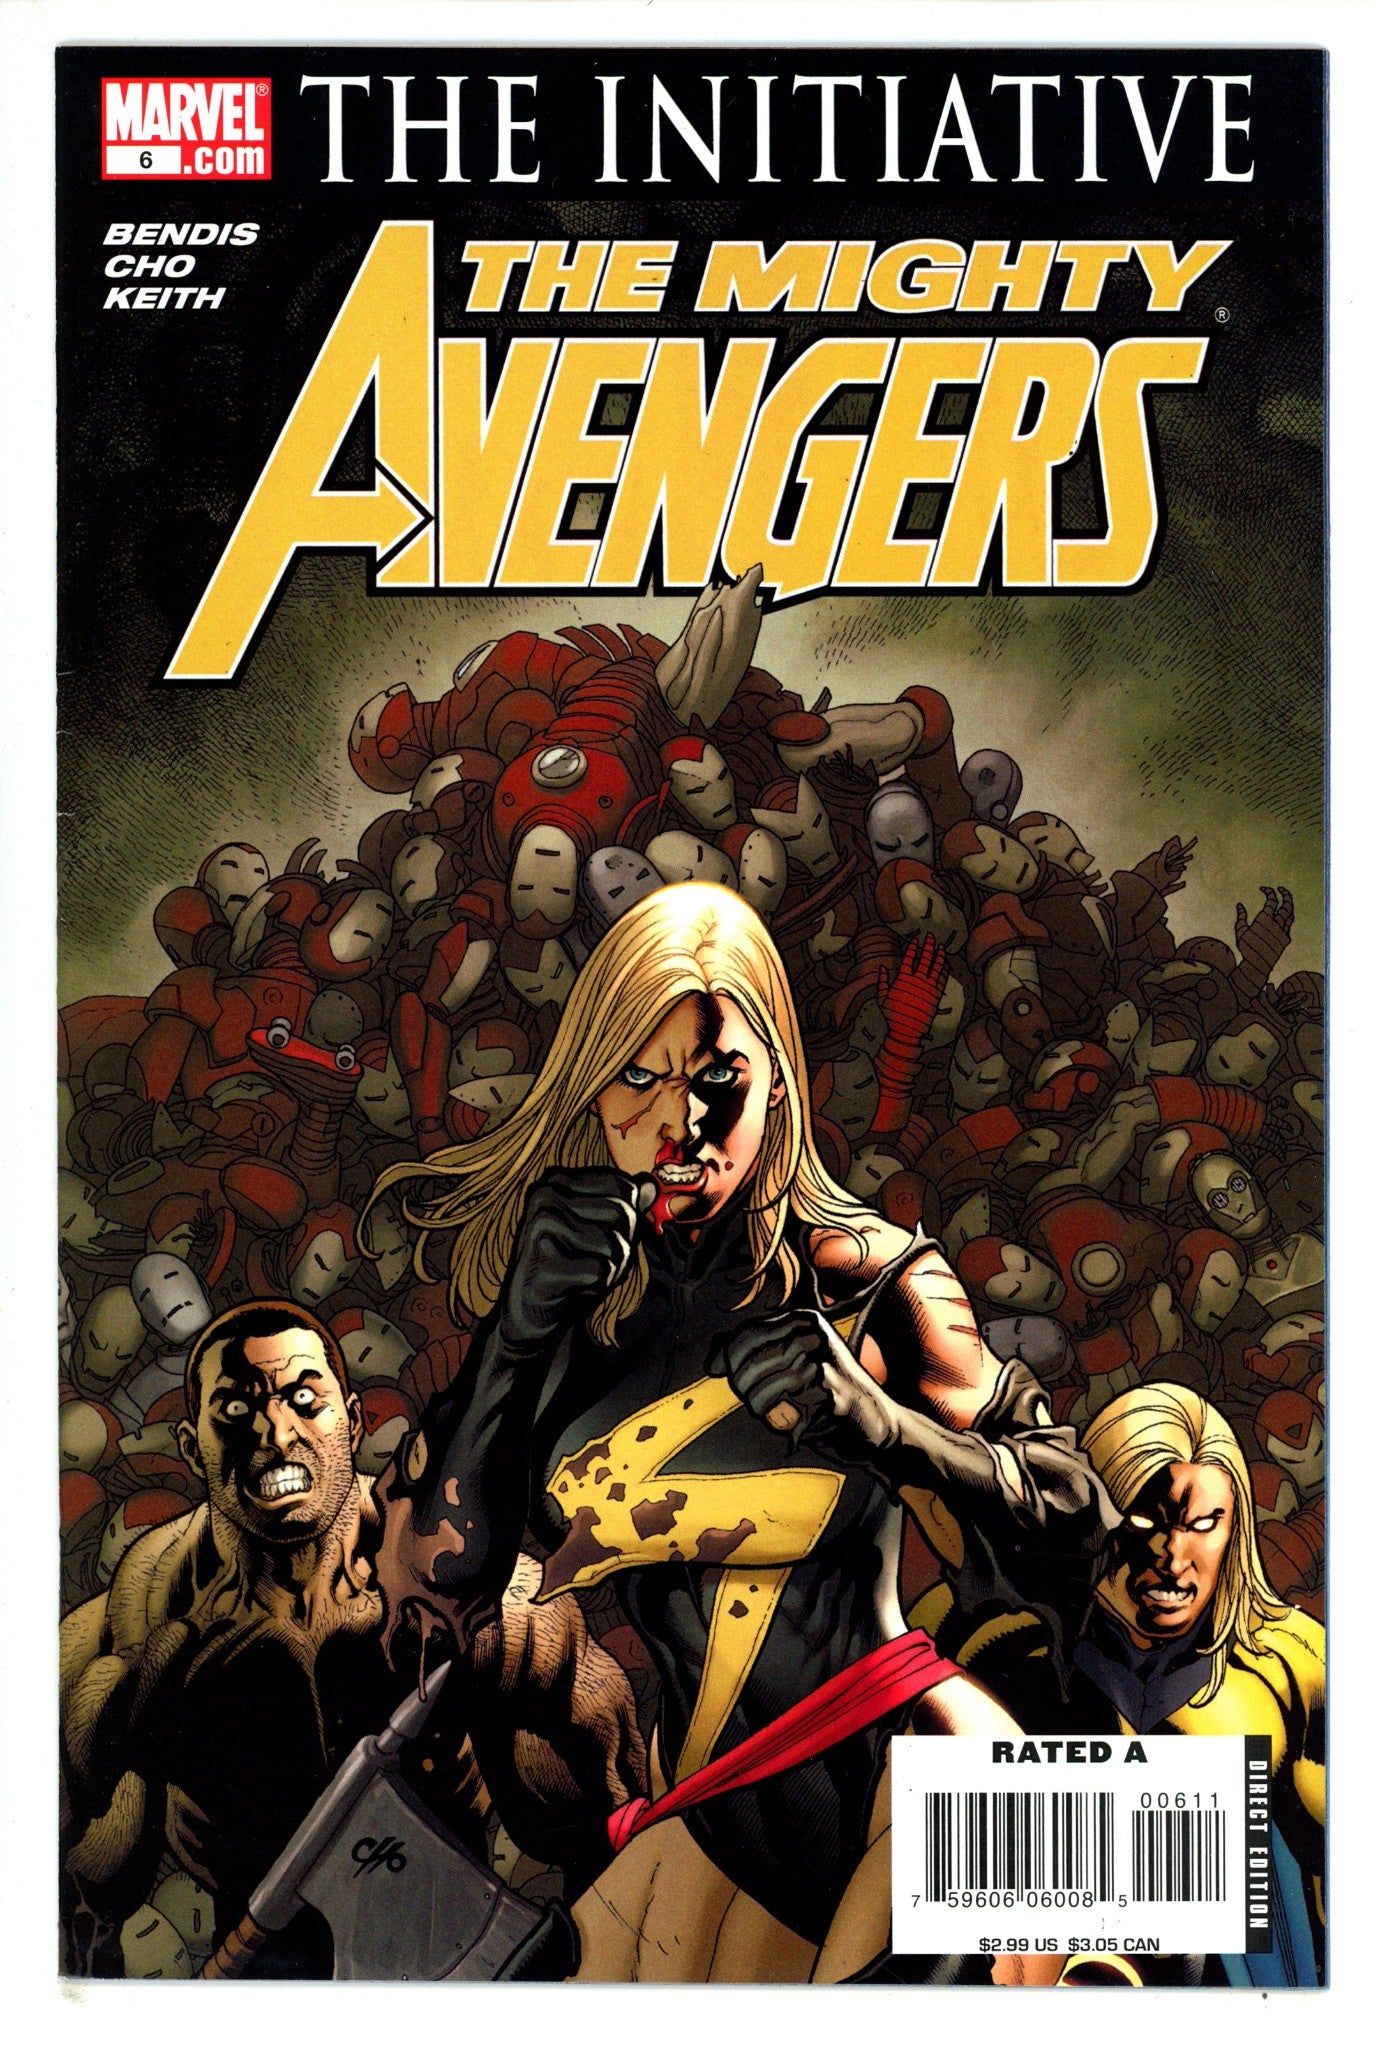 The Mighty Avengers Vol 1 6 High Grade (2008)